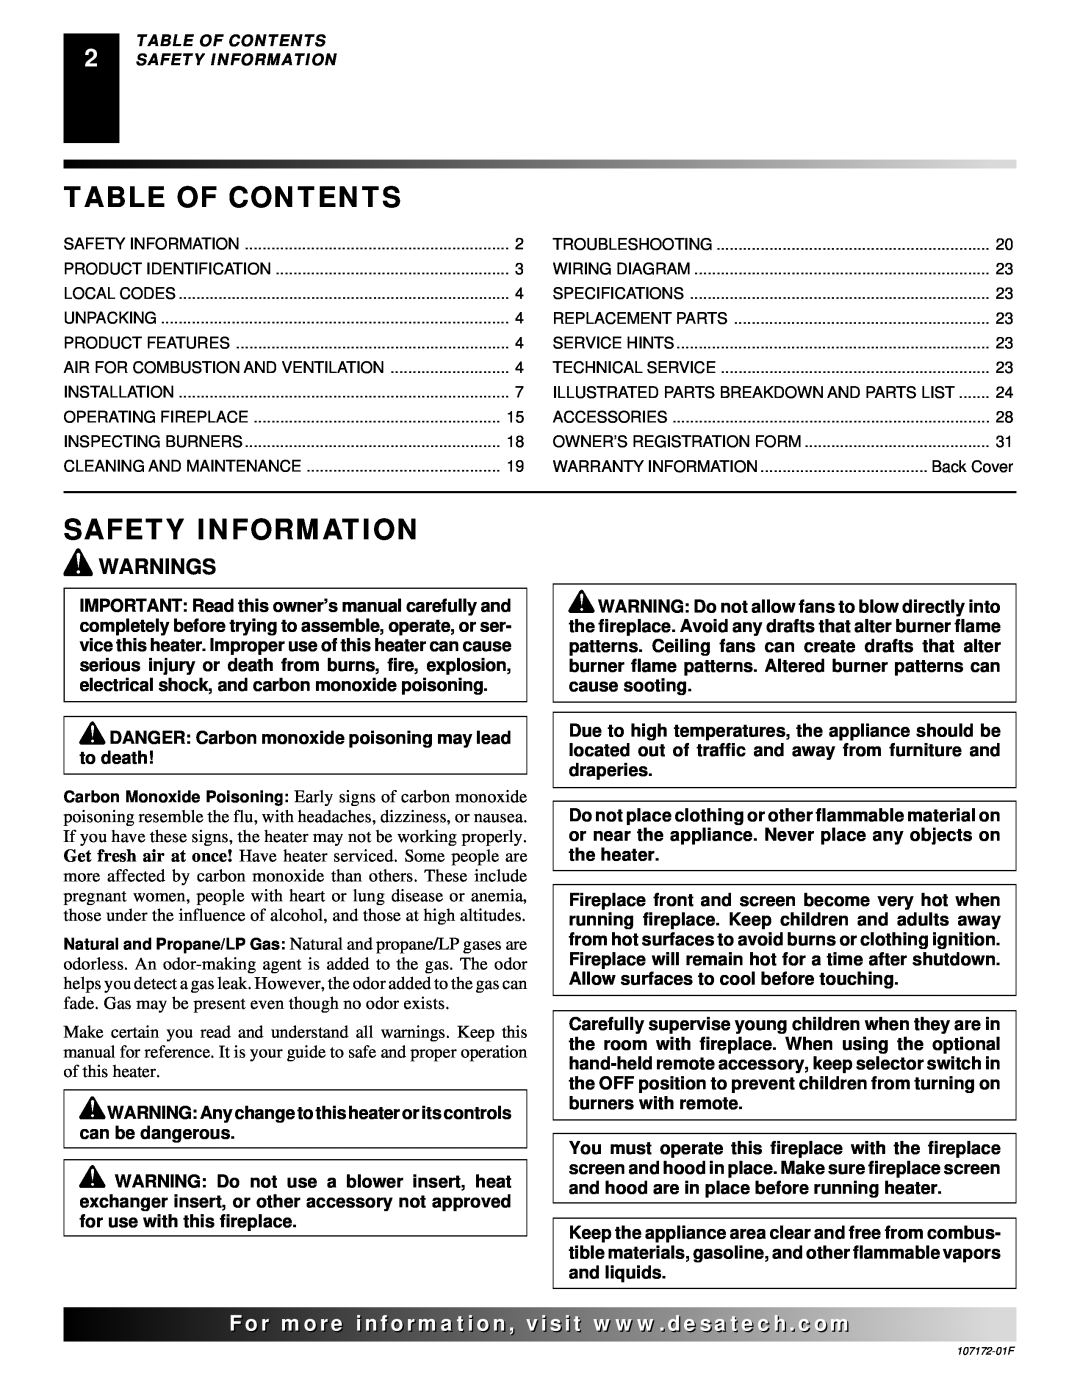 Desa EFS33PR installation manual Table Of Contents, Safety Information, Warnings 